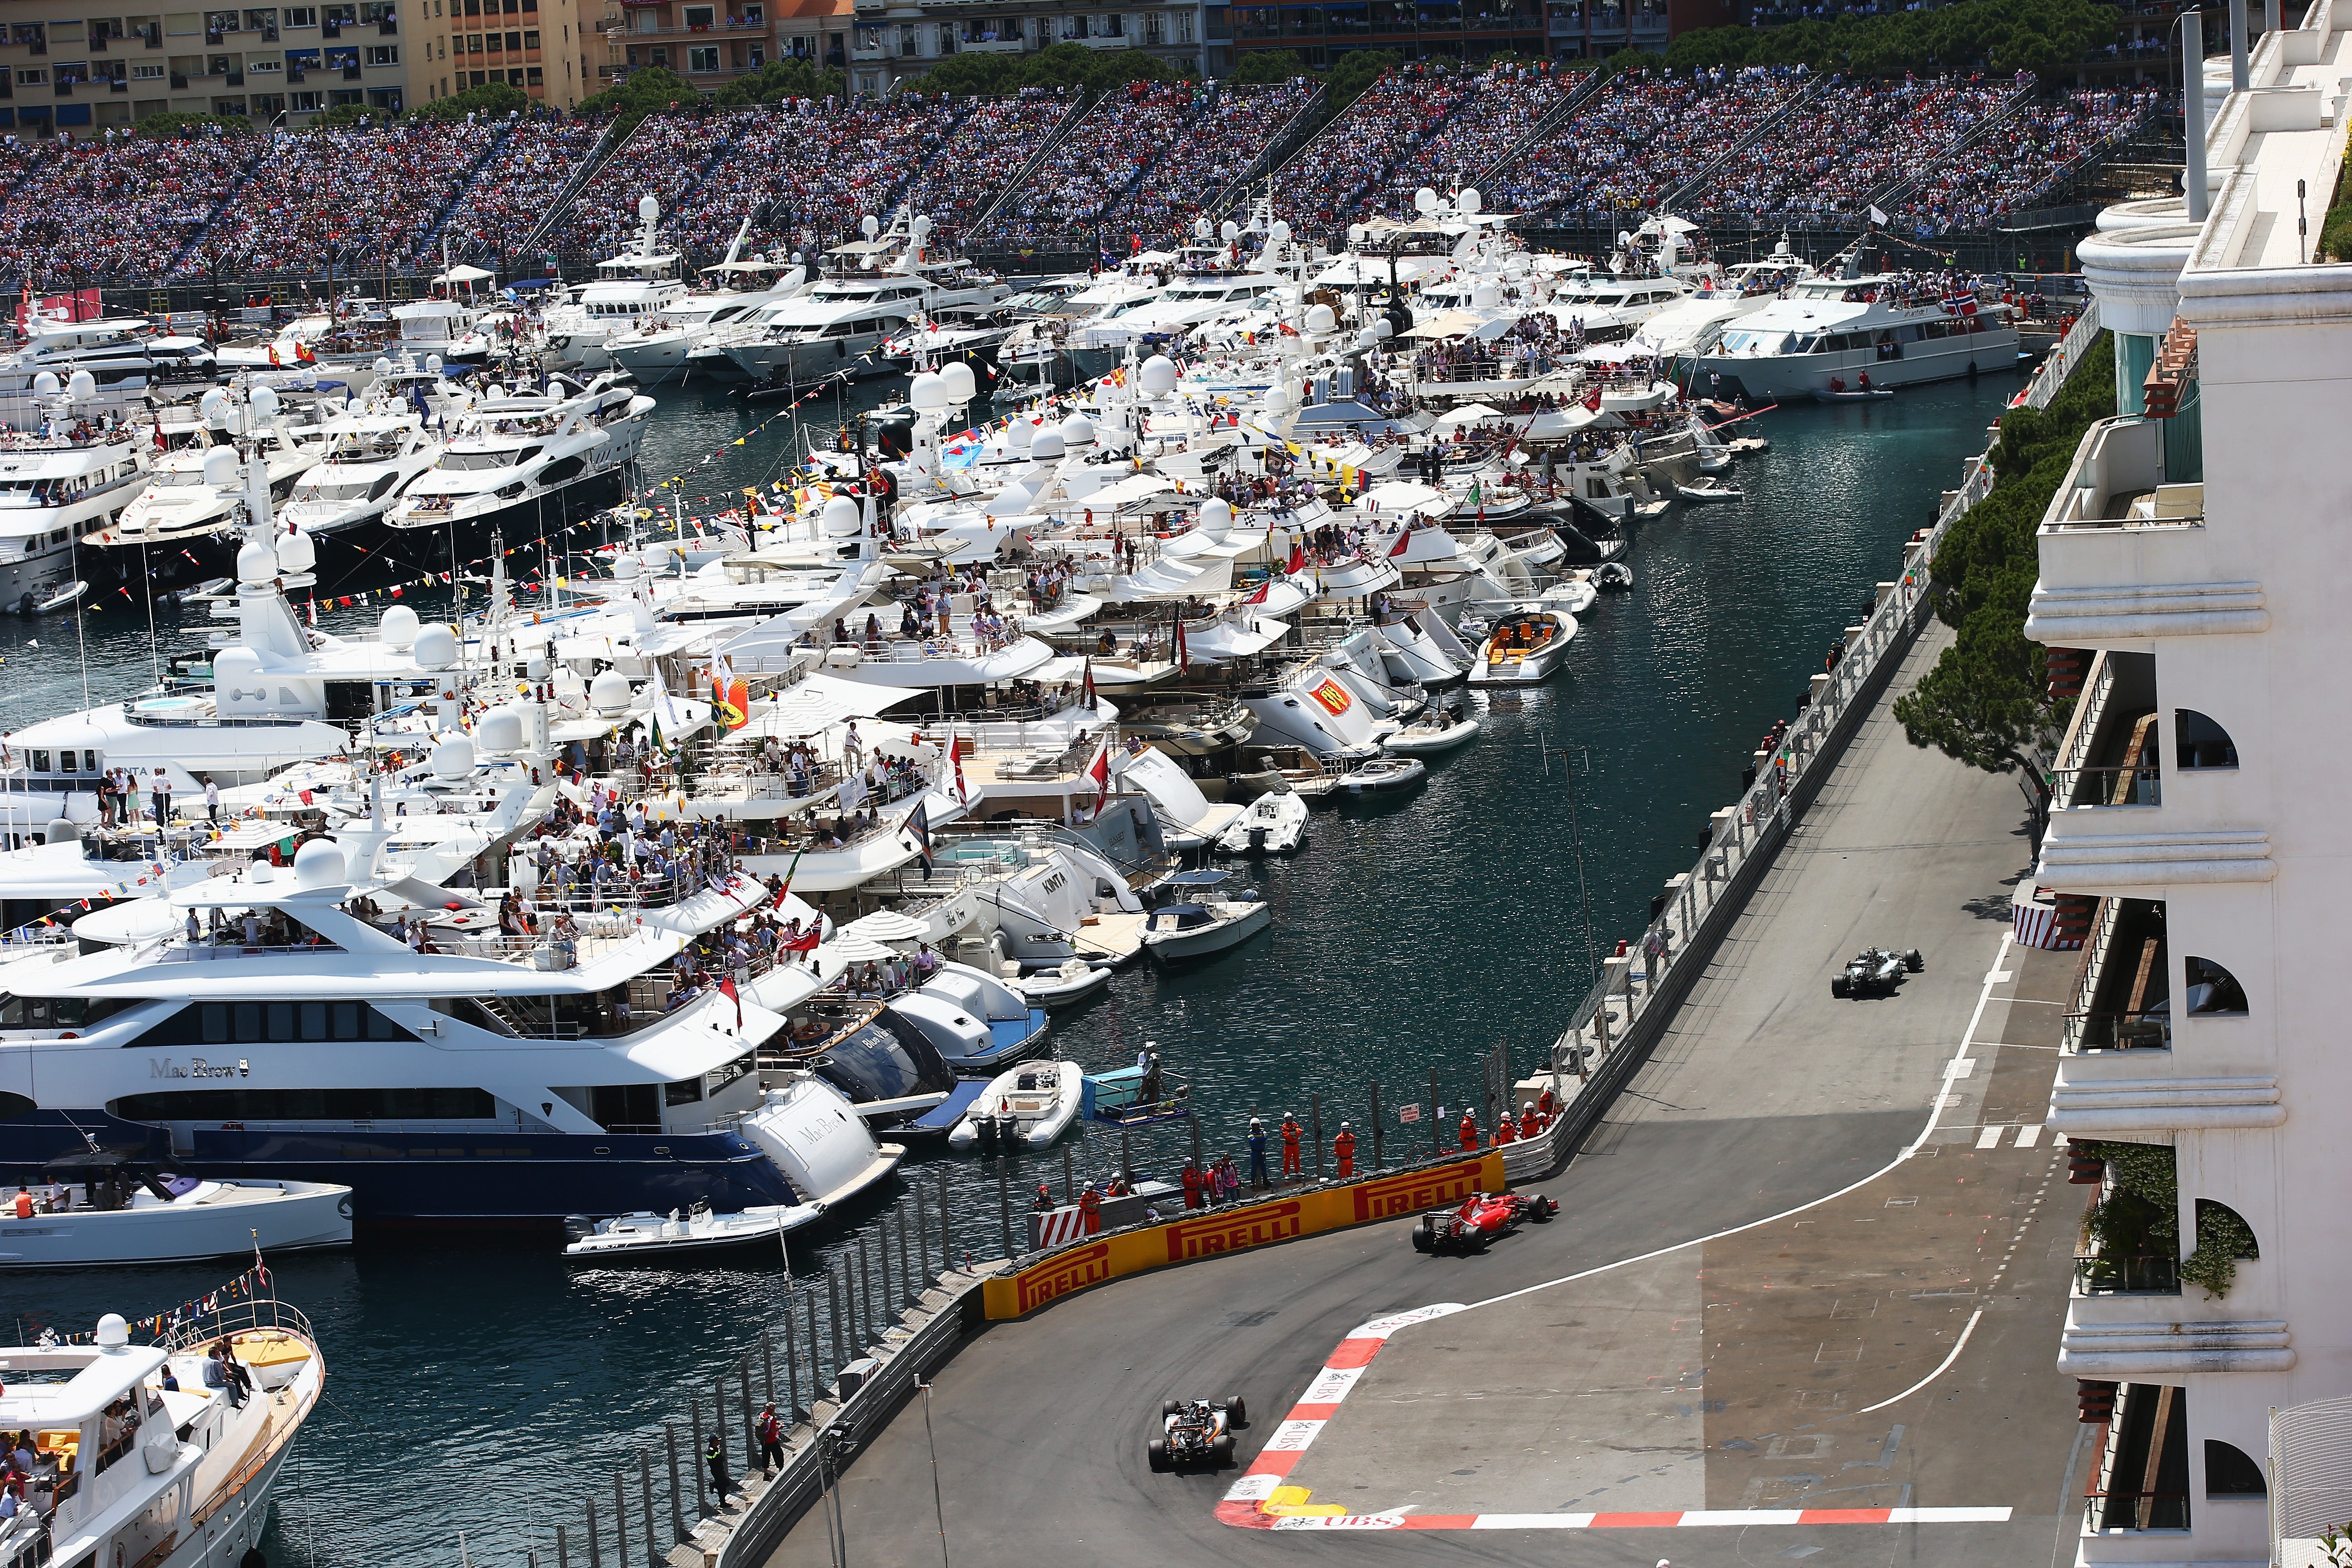 Fans watch from the Monaco Grand Prix from the marina